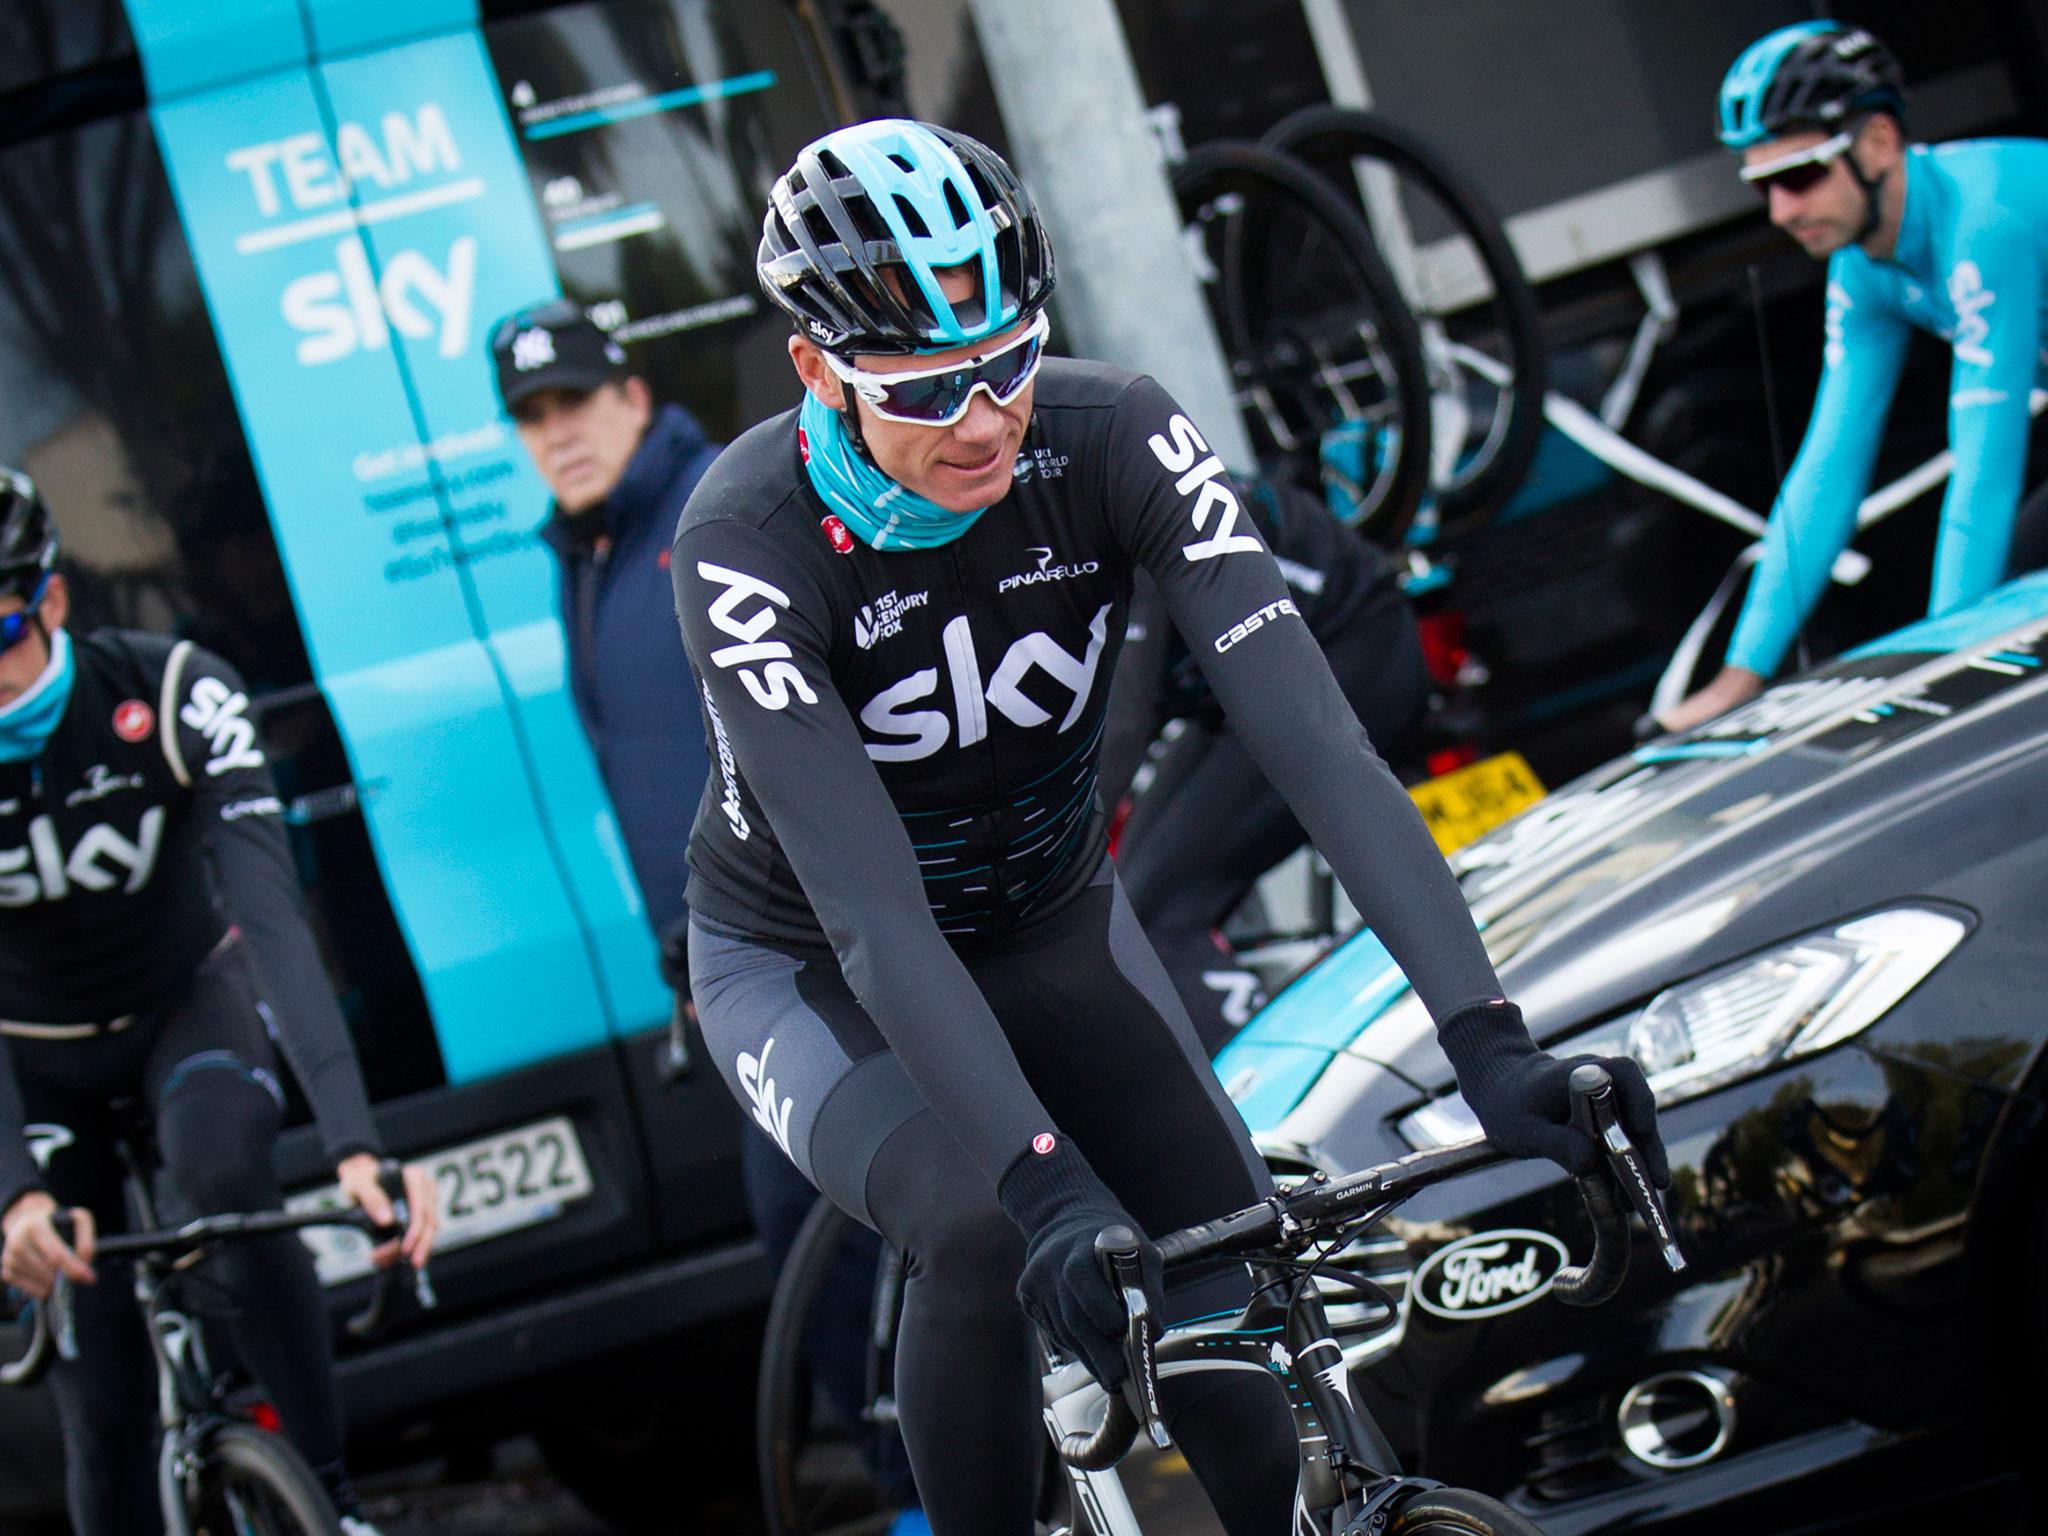 Chris Froome returned an adverse sample at the Vuelta a Espana